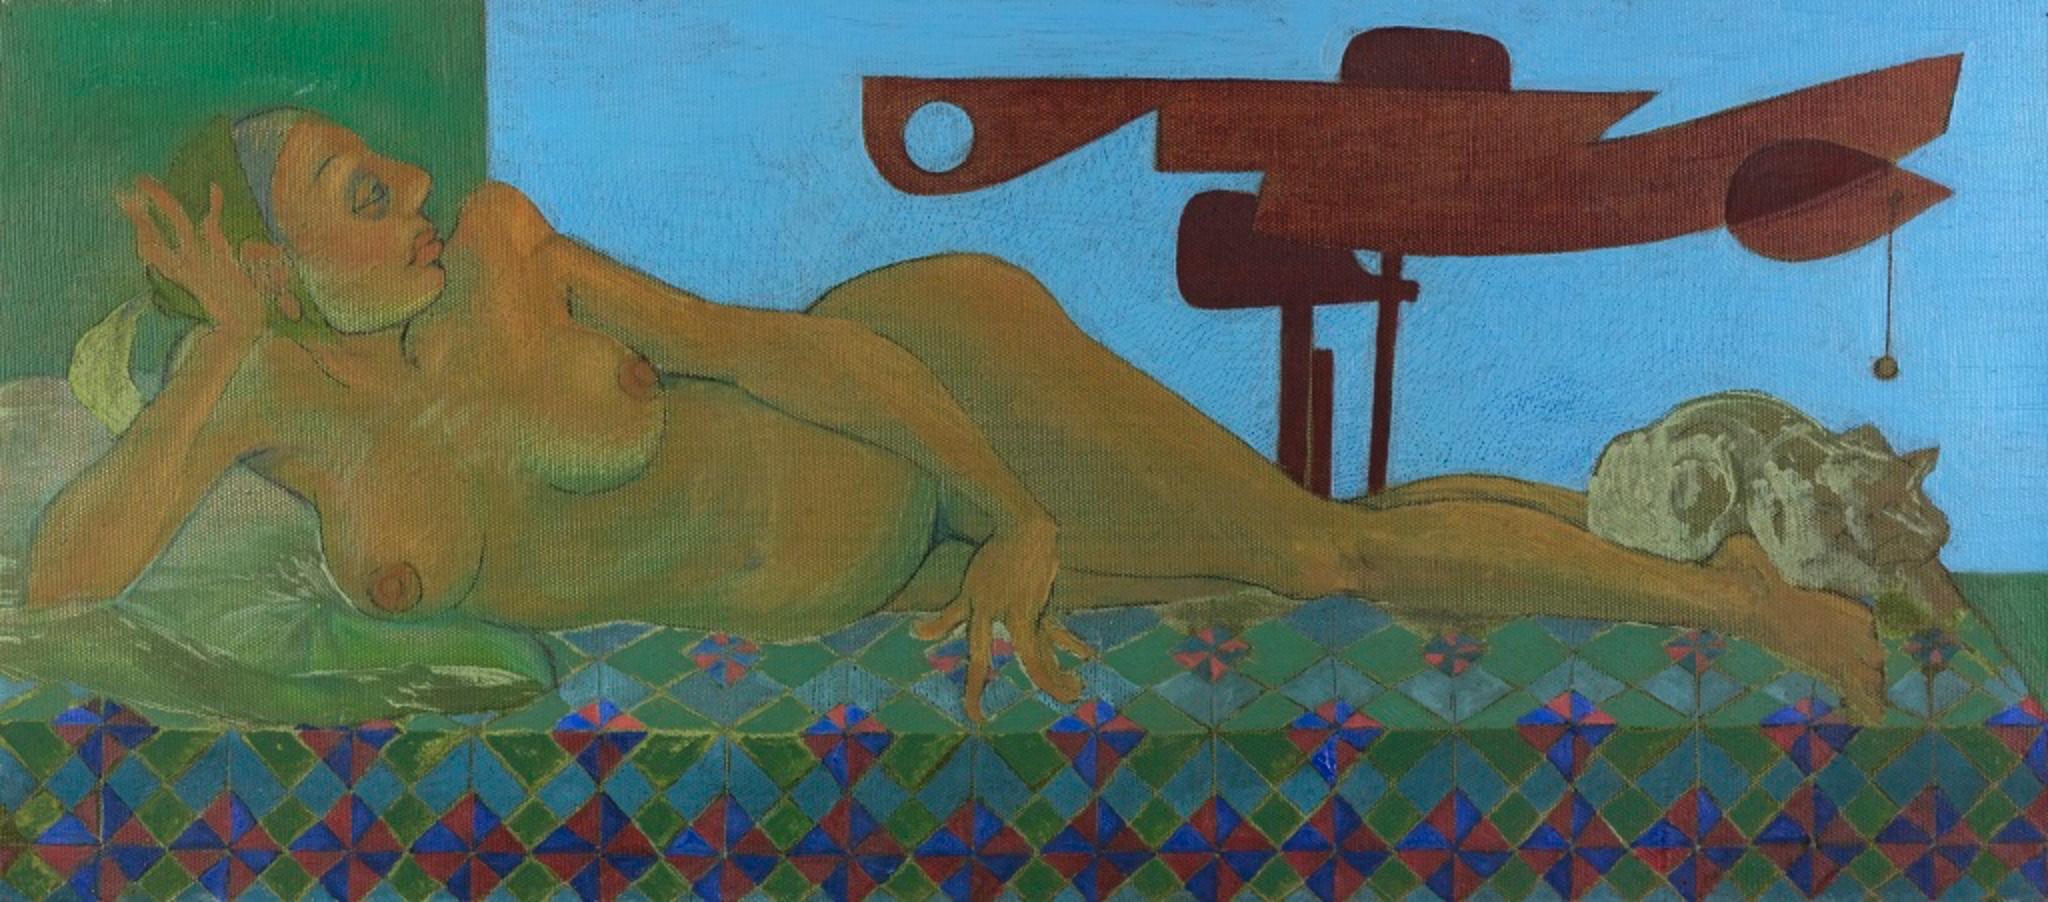 Lying Nude with Signals 1 - Oil Paint on Canvas by Leo Guida - 1988